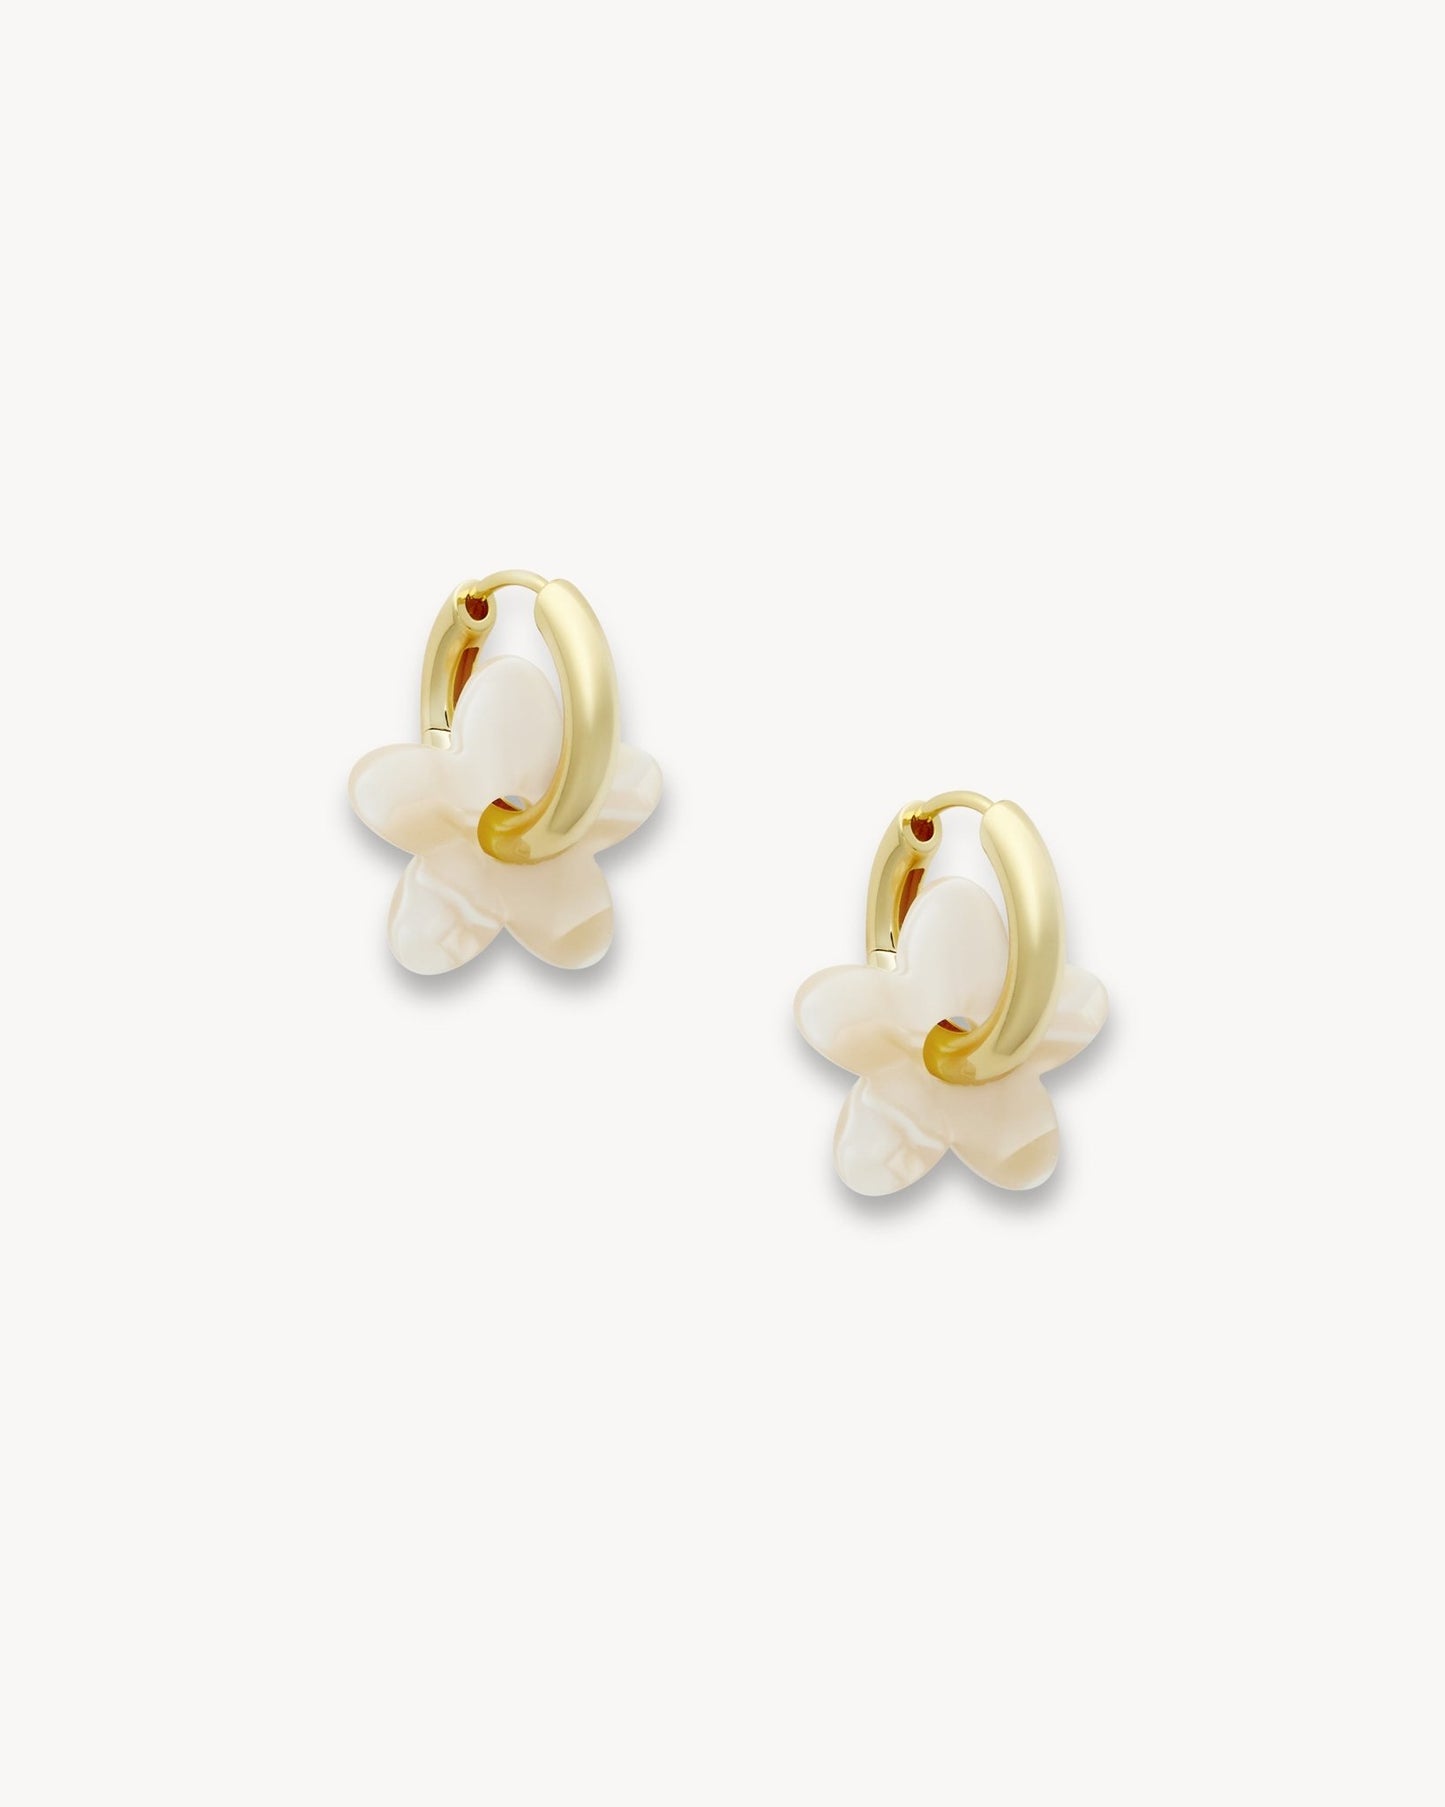 Flower Earring Charms in Ivory